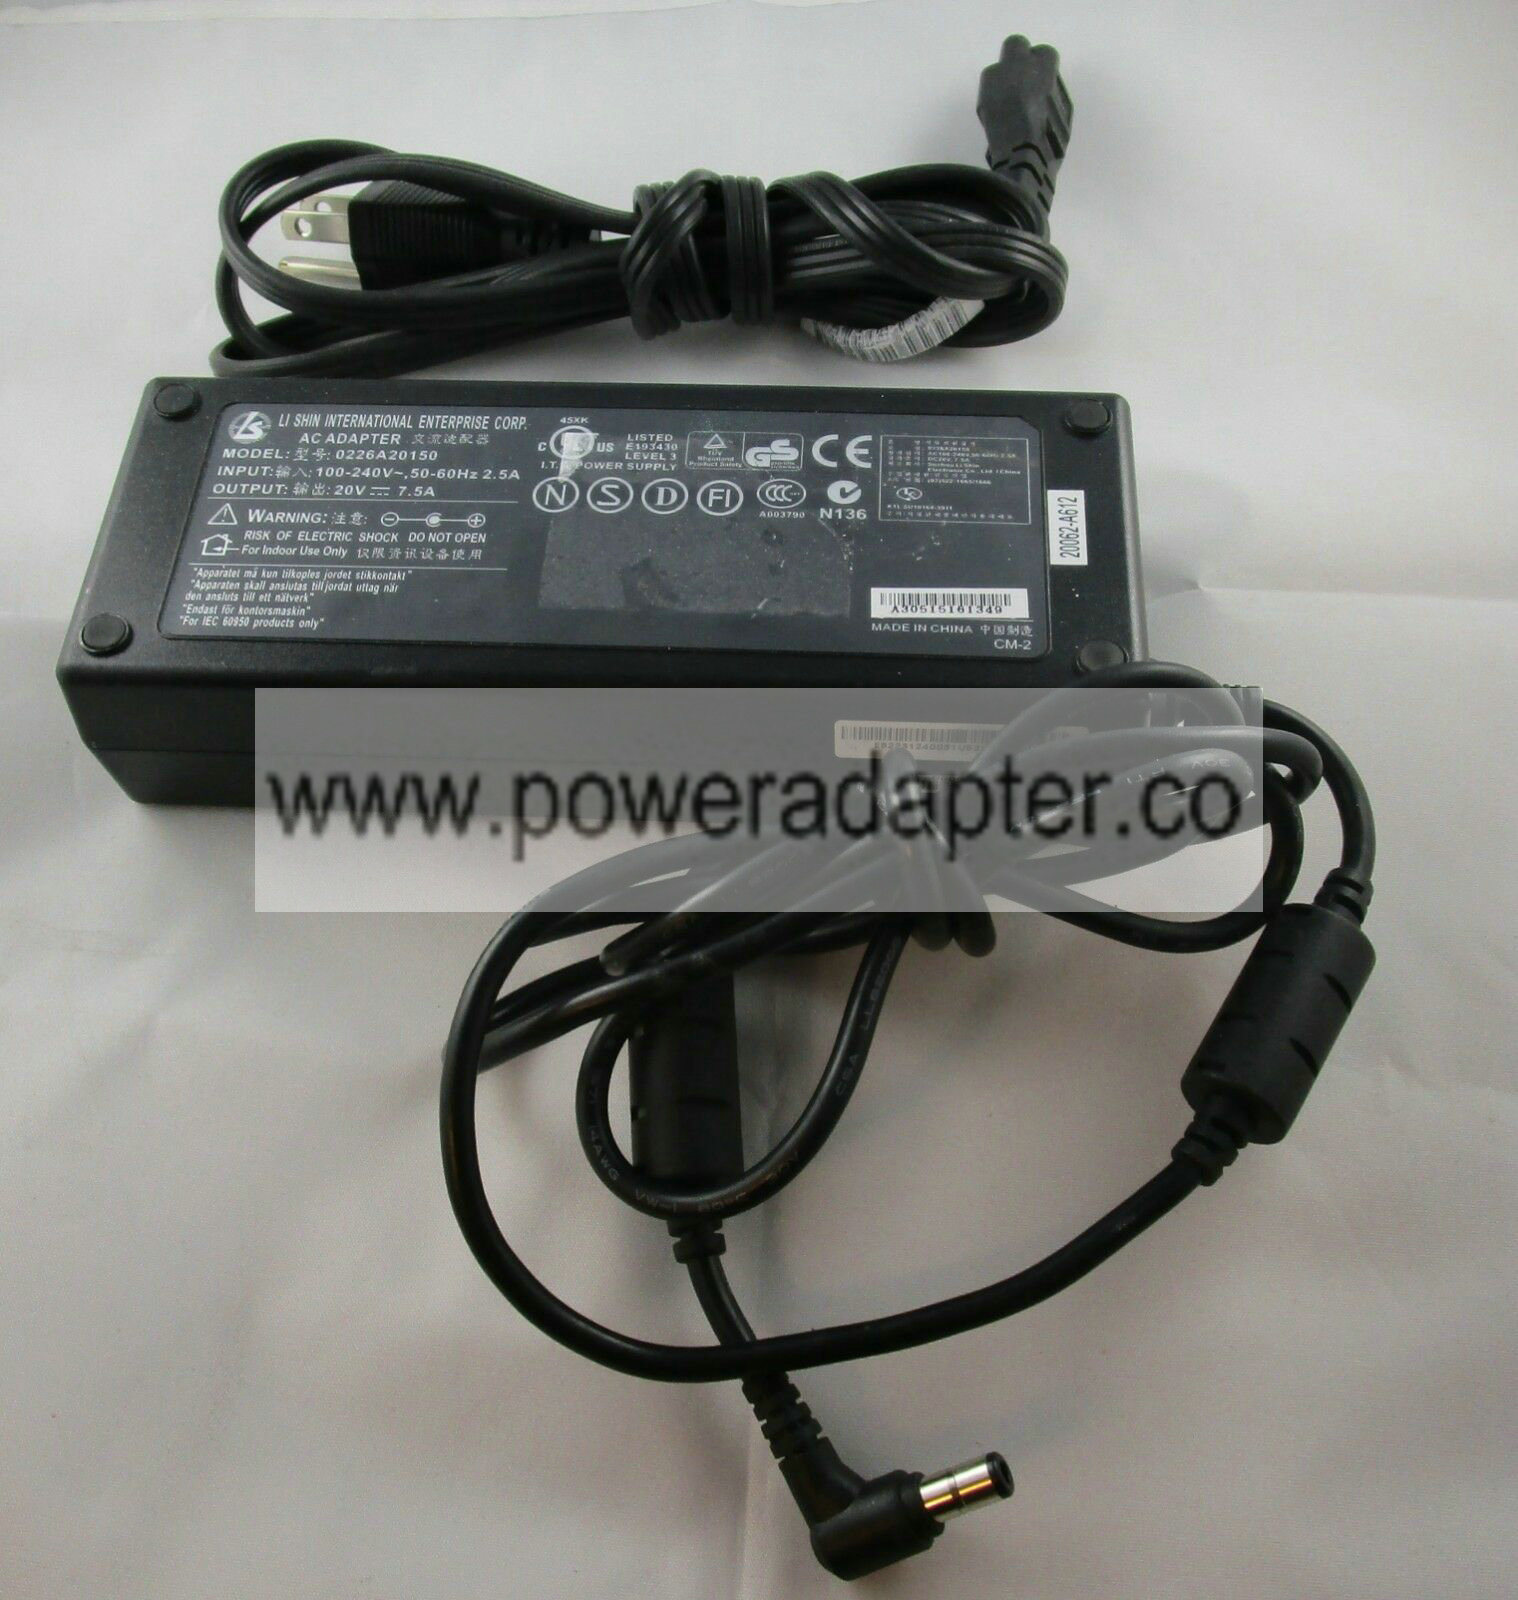 LiShin 20V 7.5A 150W AC Power Adapter 0226A20150 Bundled Items: Power Cable MPN: 0226A20150 Max. Output Power: 150 W - Click Image to Close